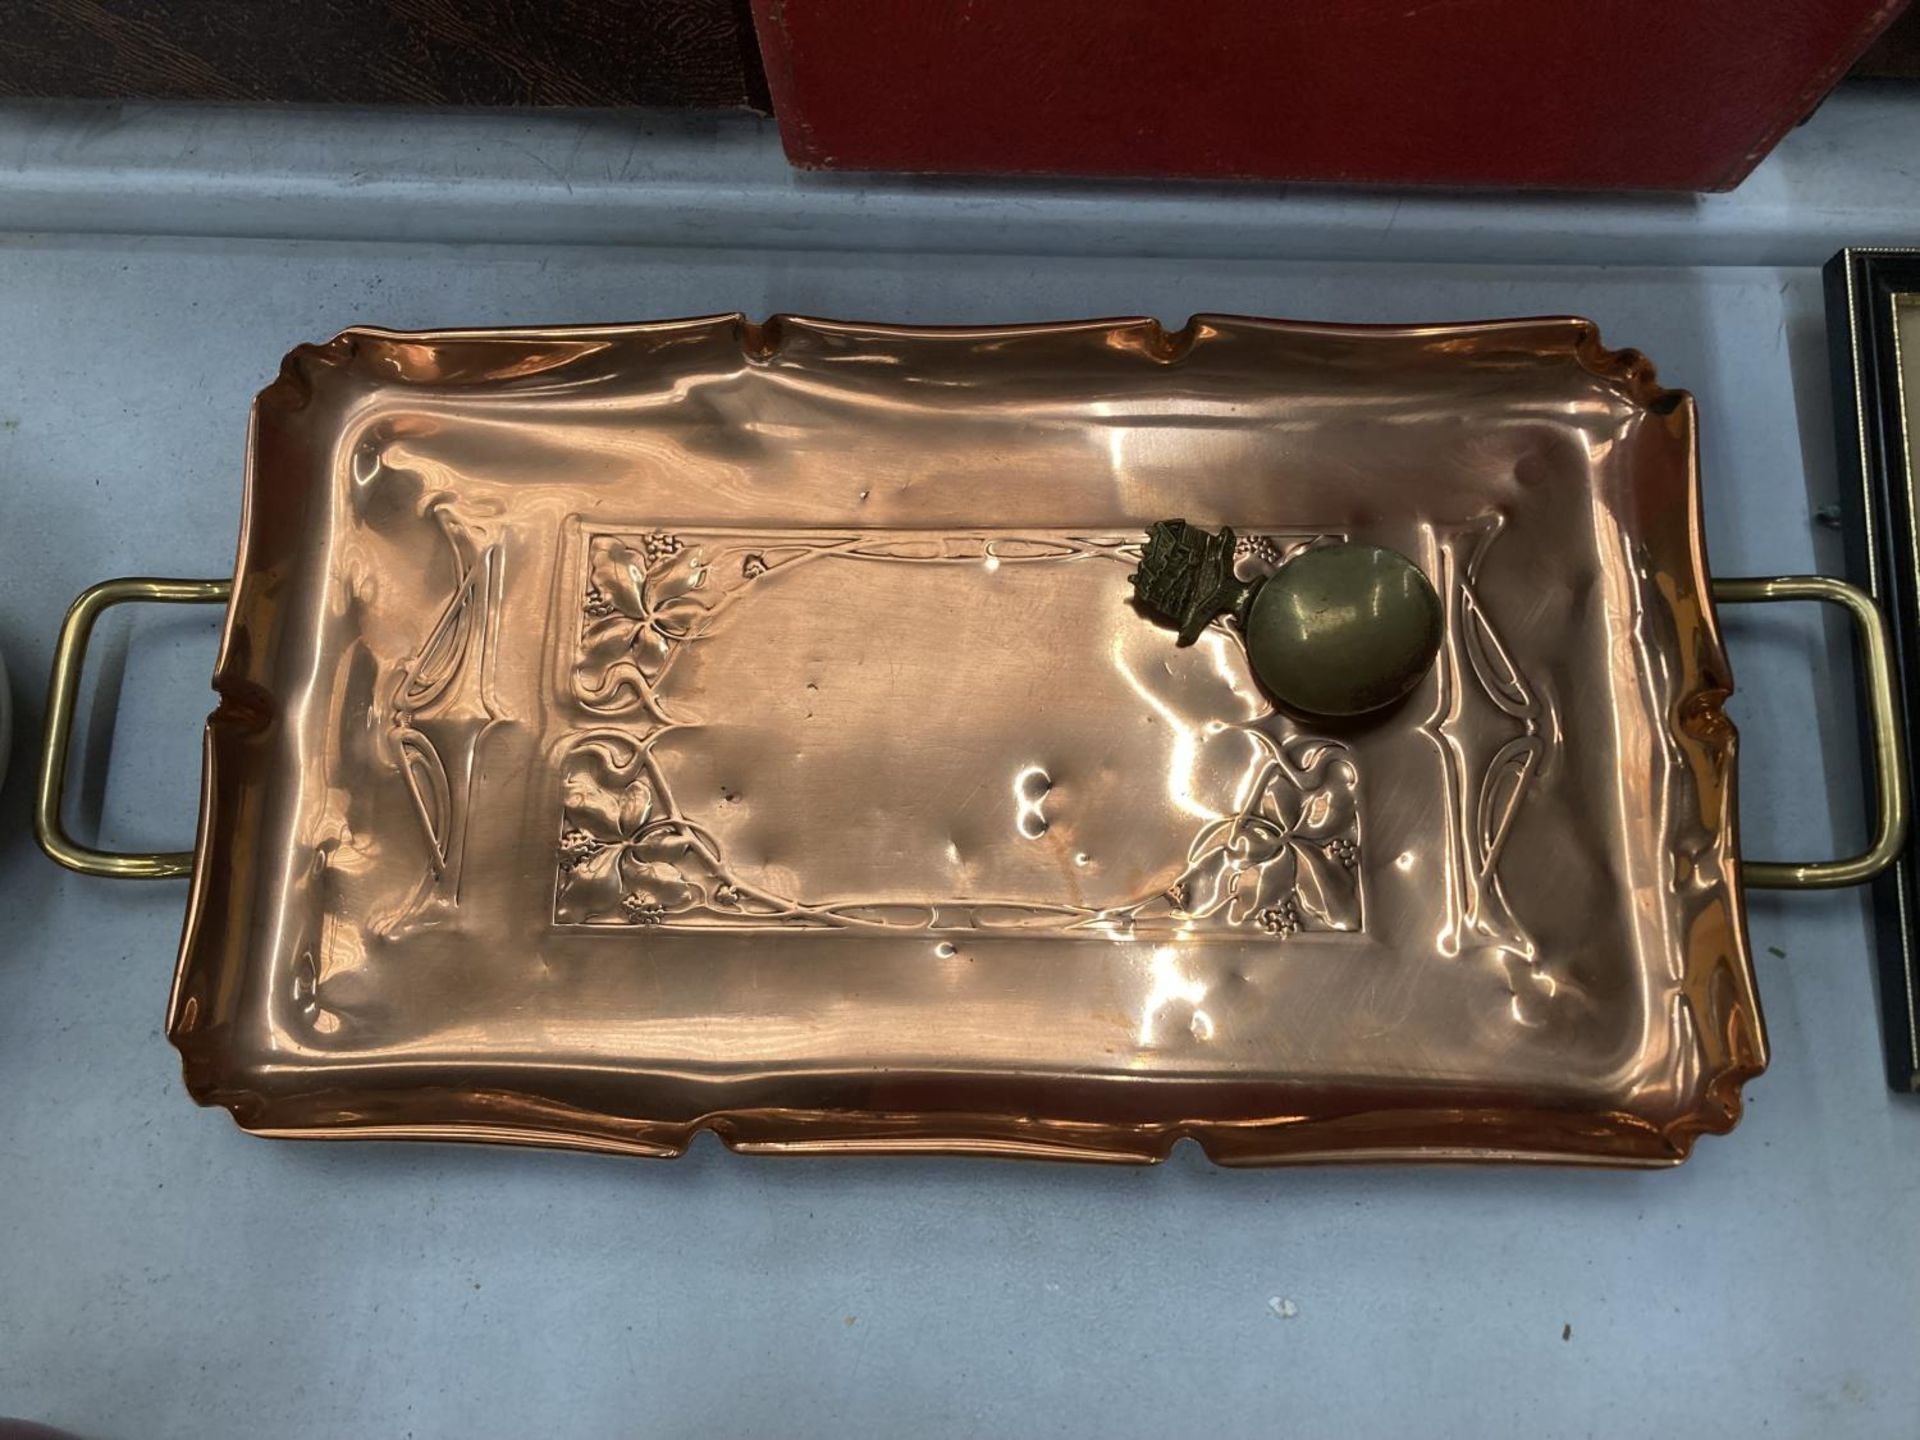 A COPPER ARTS AND CRAFTS/ART NOUVEAU TRAY AND A COPPER TEA CADDY - Image 3 of 3